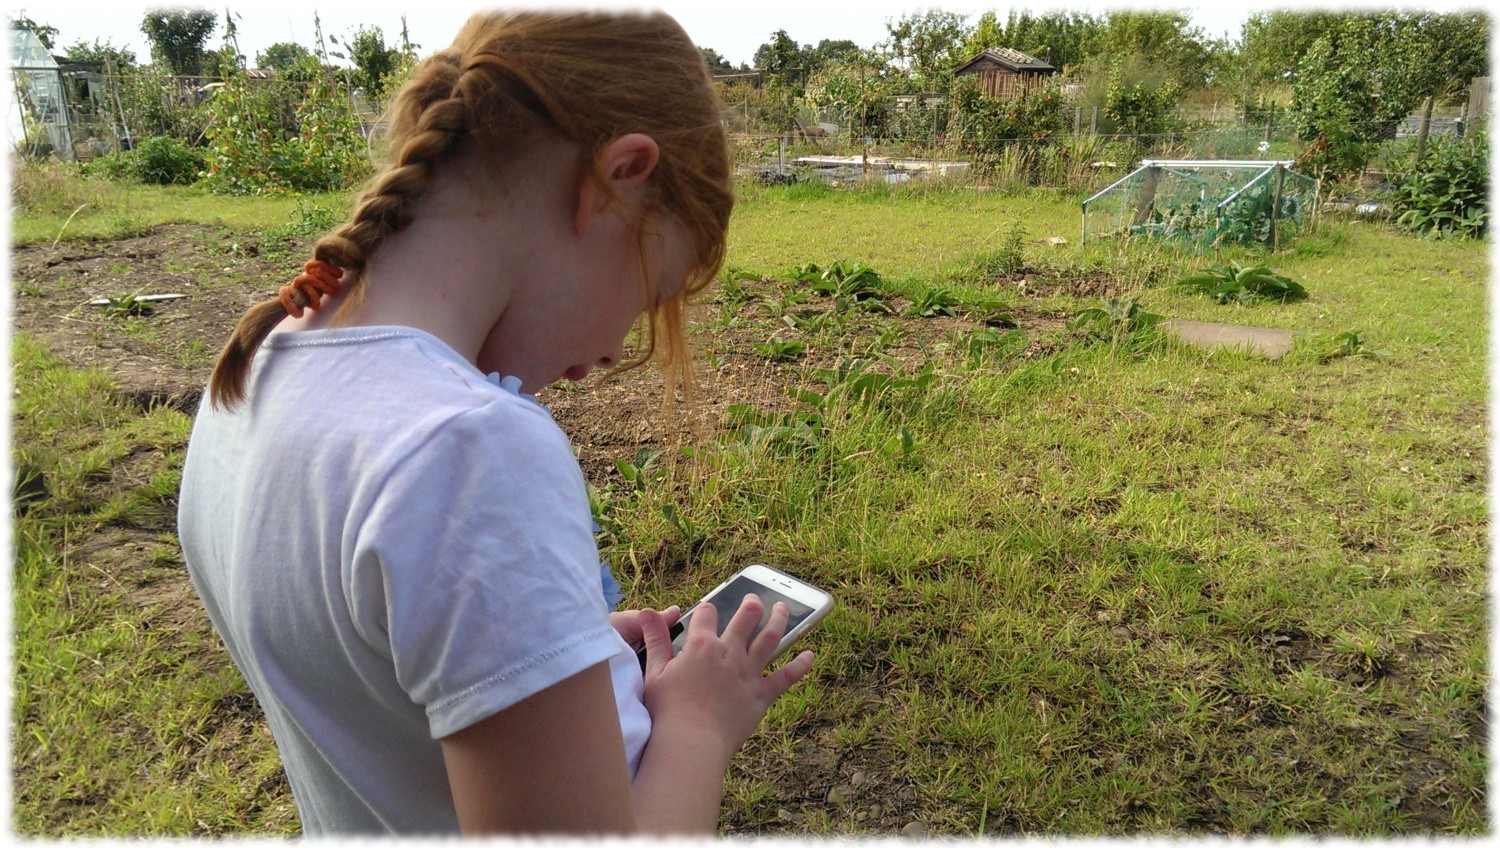 Our vegetable garden planning software is fully functional on phones and tablets